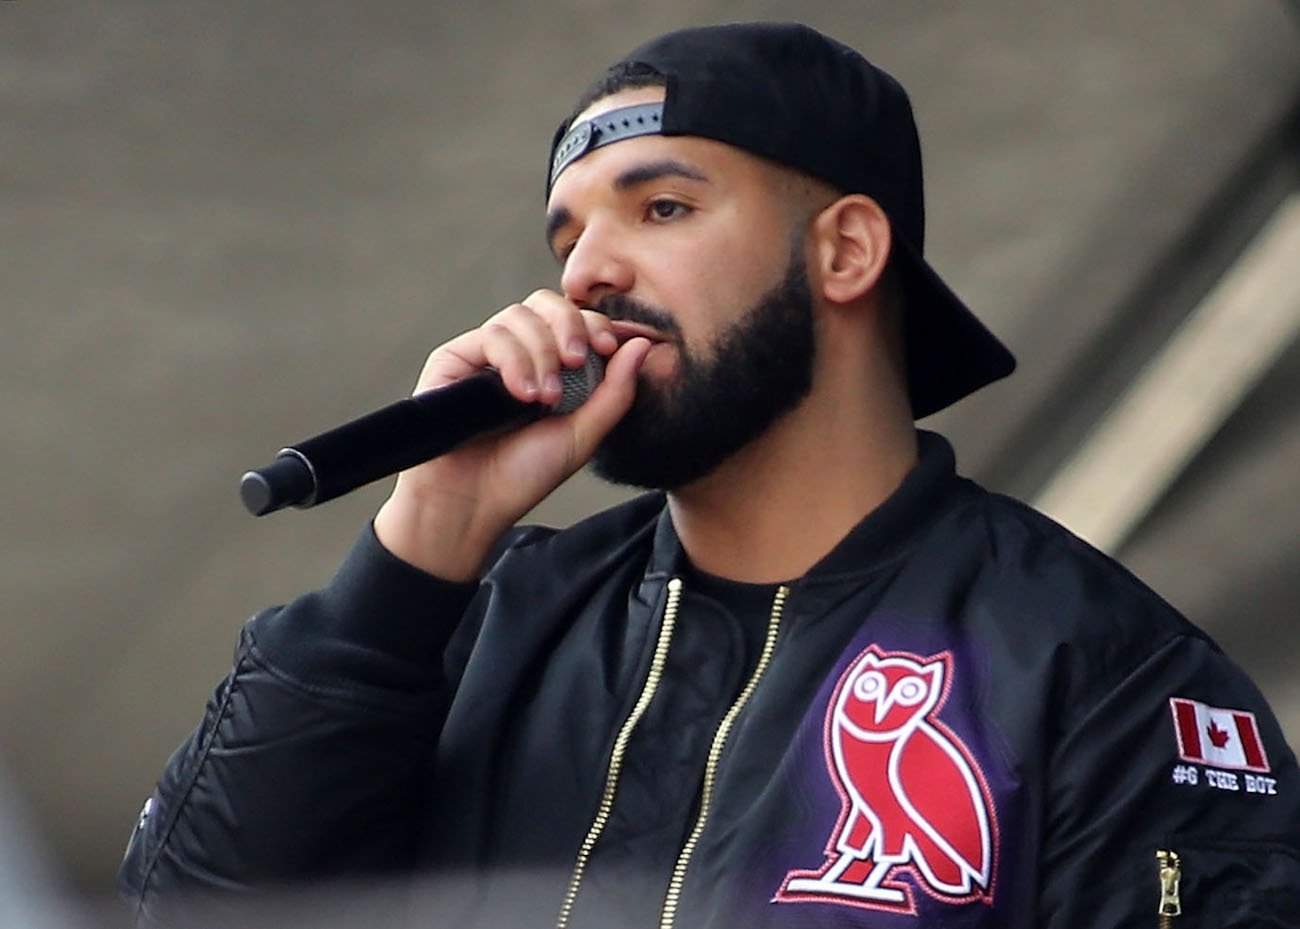 Drake holding a microphone while wearing a black jacket and backward hat.